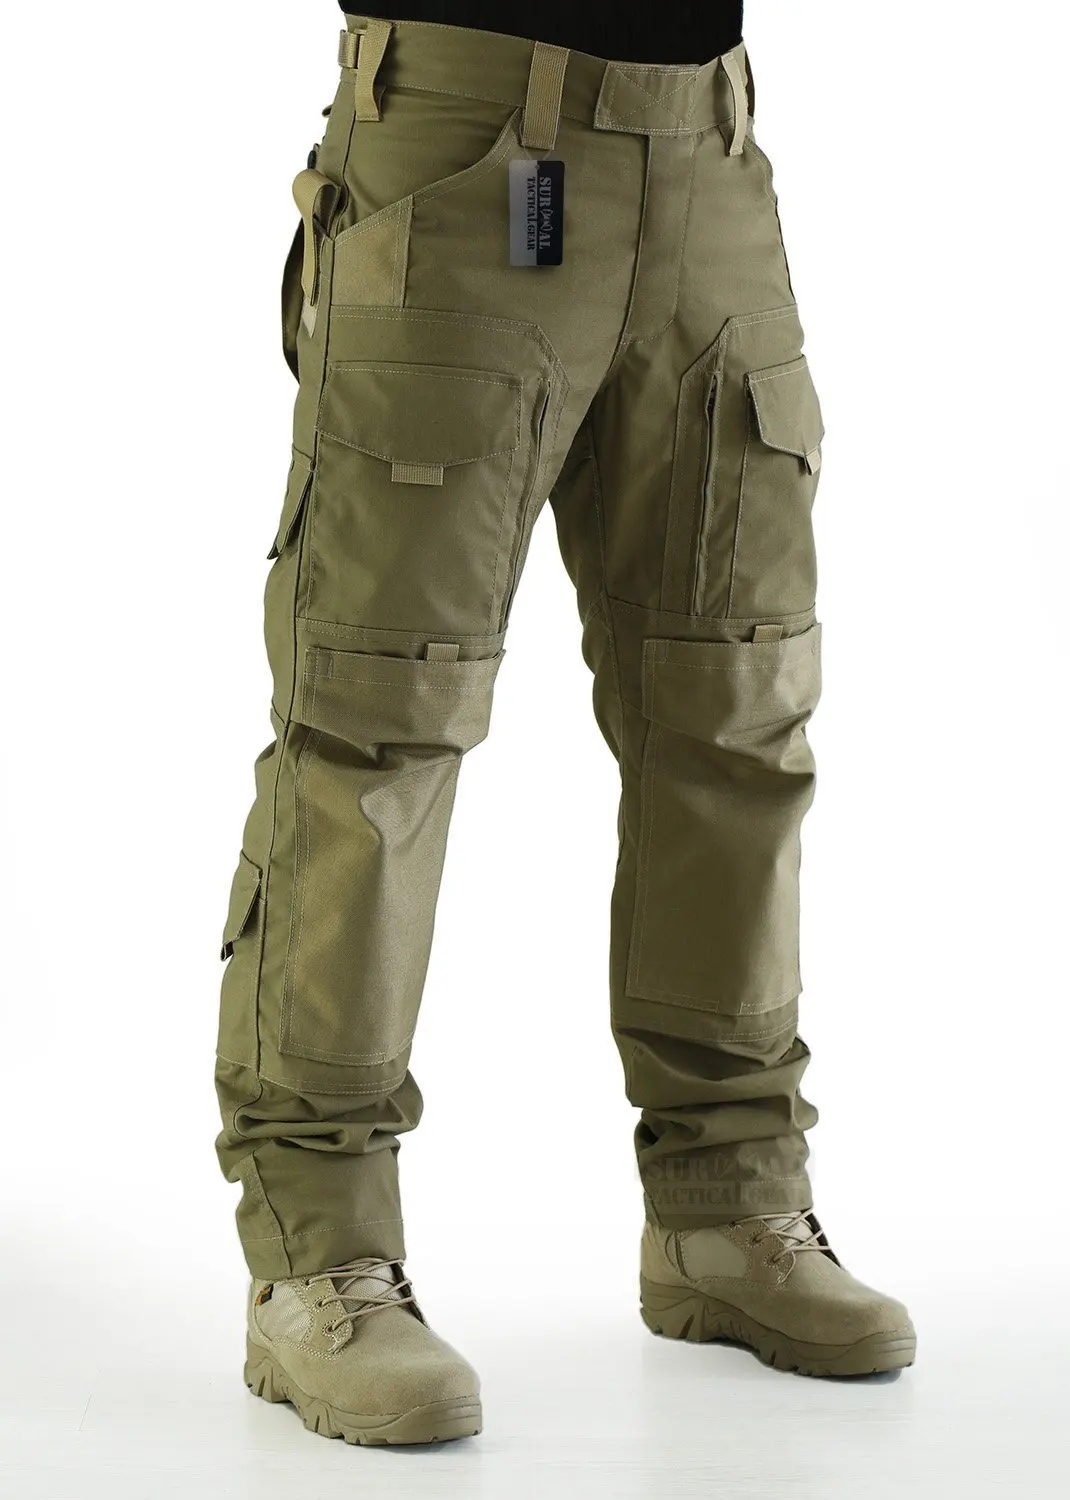 Buy ZAPT Tactical Molle Ripstop Combat Trousers Army Multicam/A-TACS LE